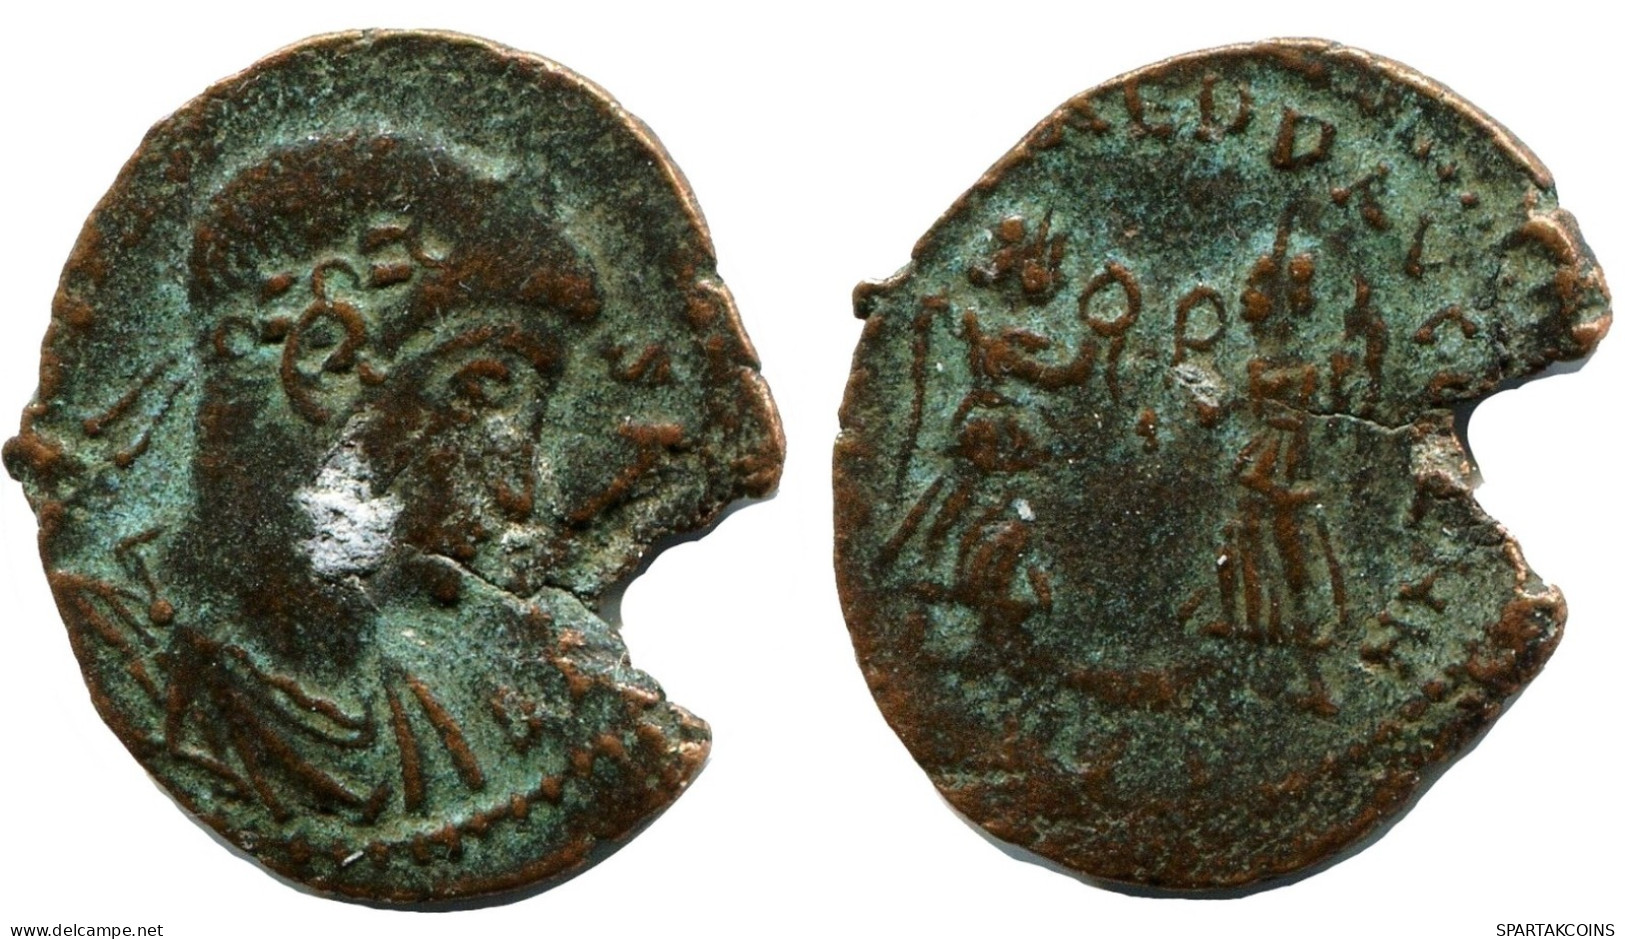 CONSTANS MINTED IN ROME ITALY FROM THE ROYAL ONTARIO MUSEUM #ANC11494.14.U.A - Der Christlischen Kaiser (307 / 363)